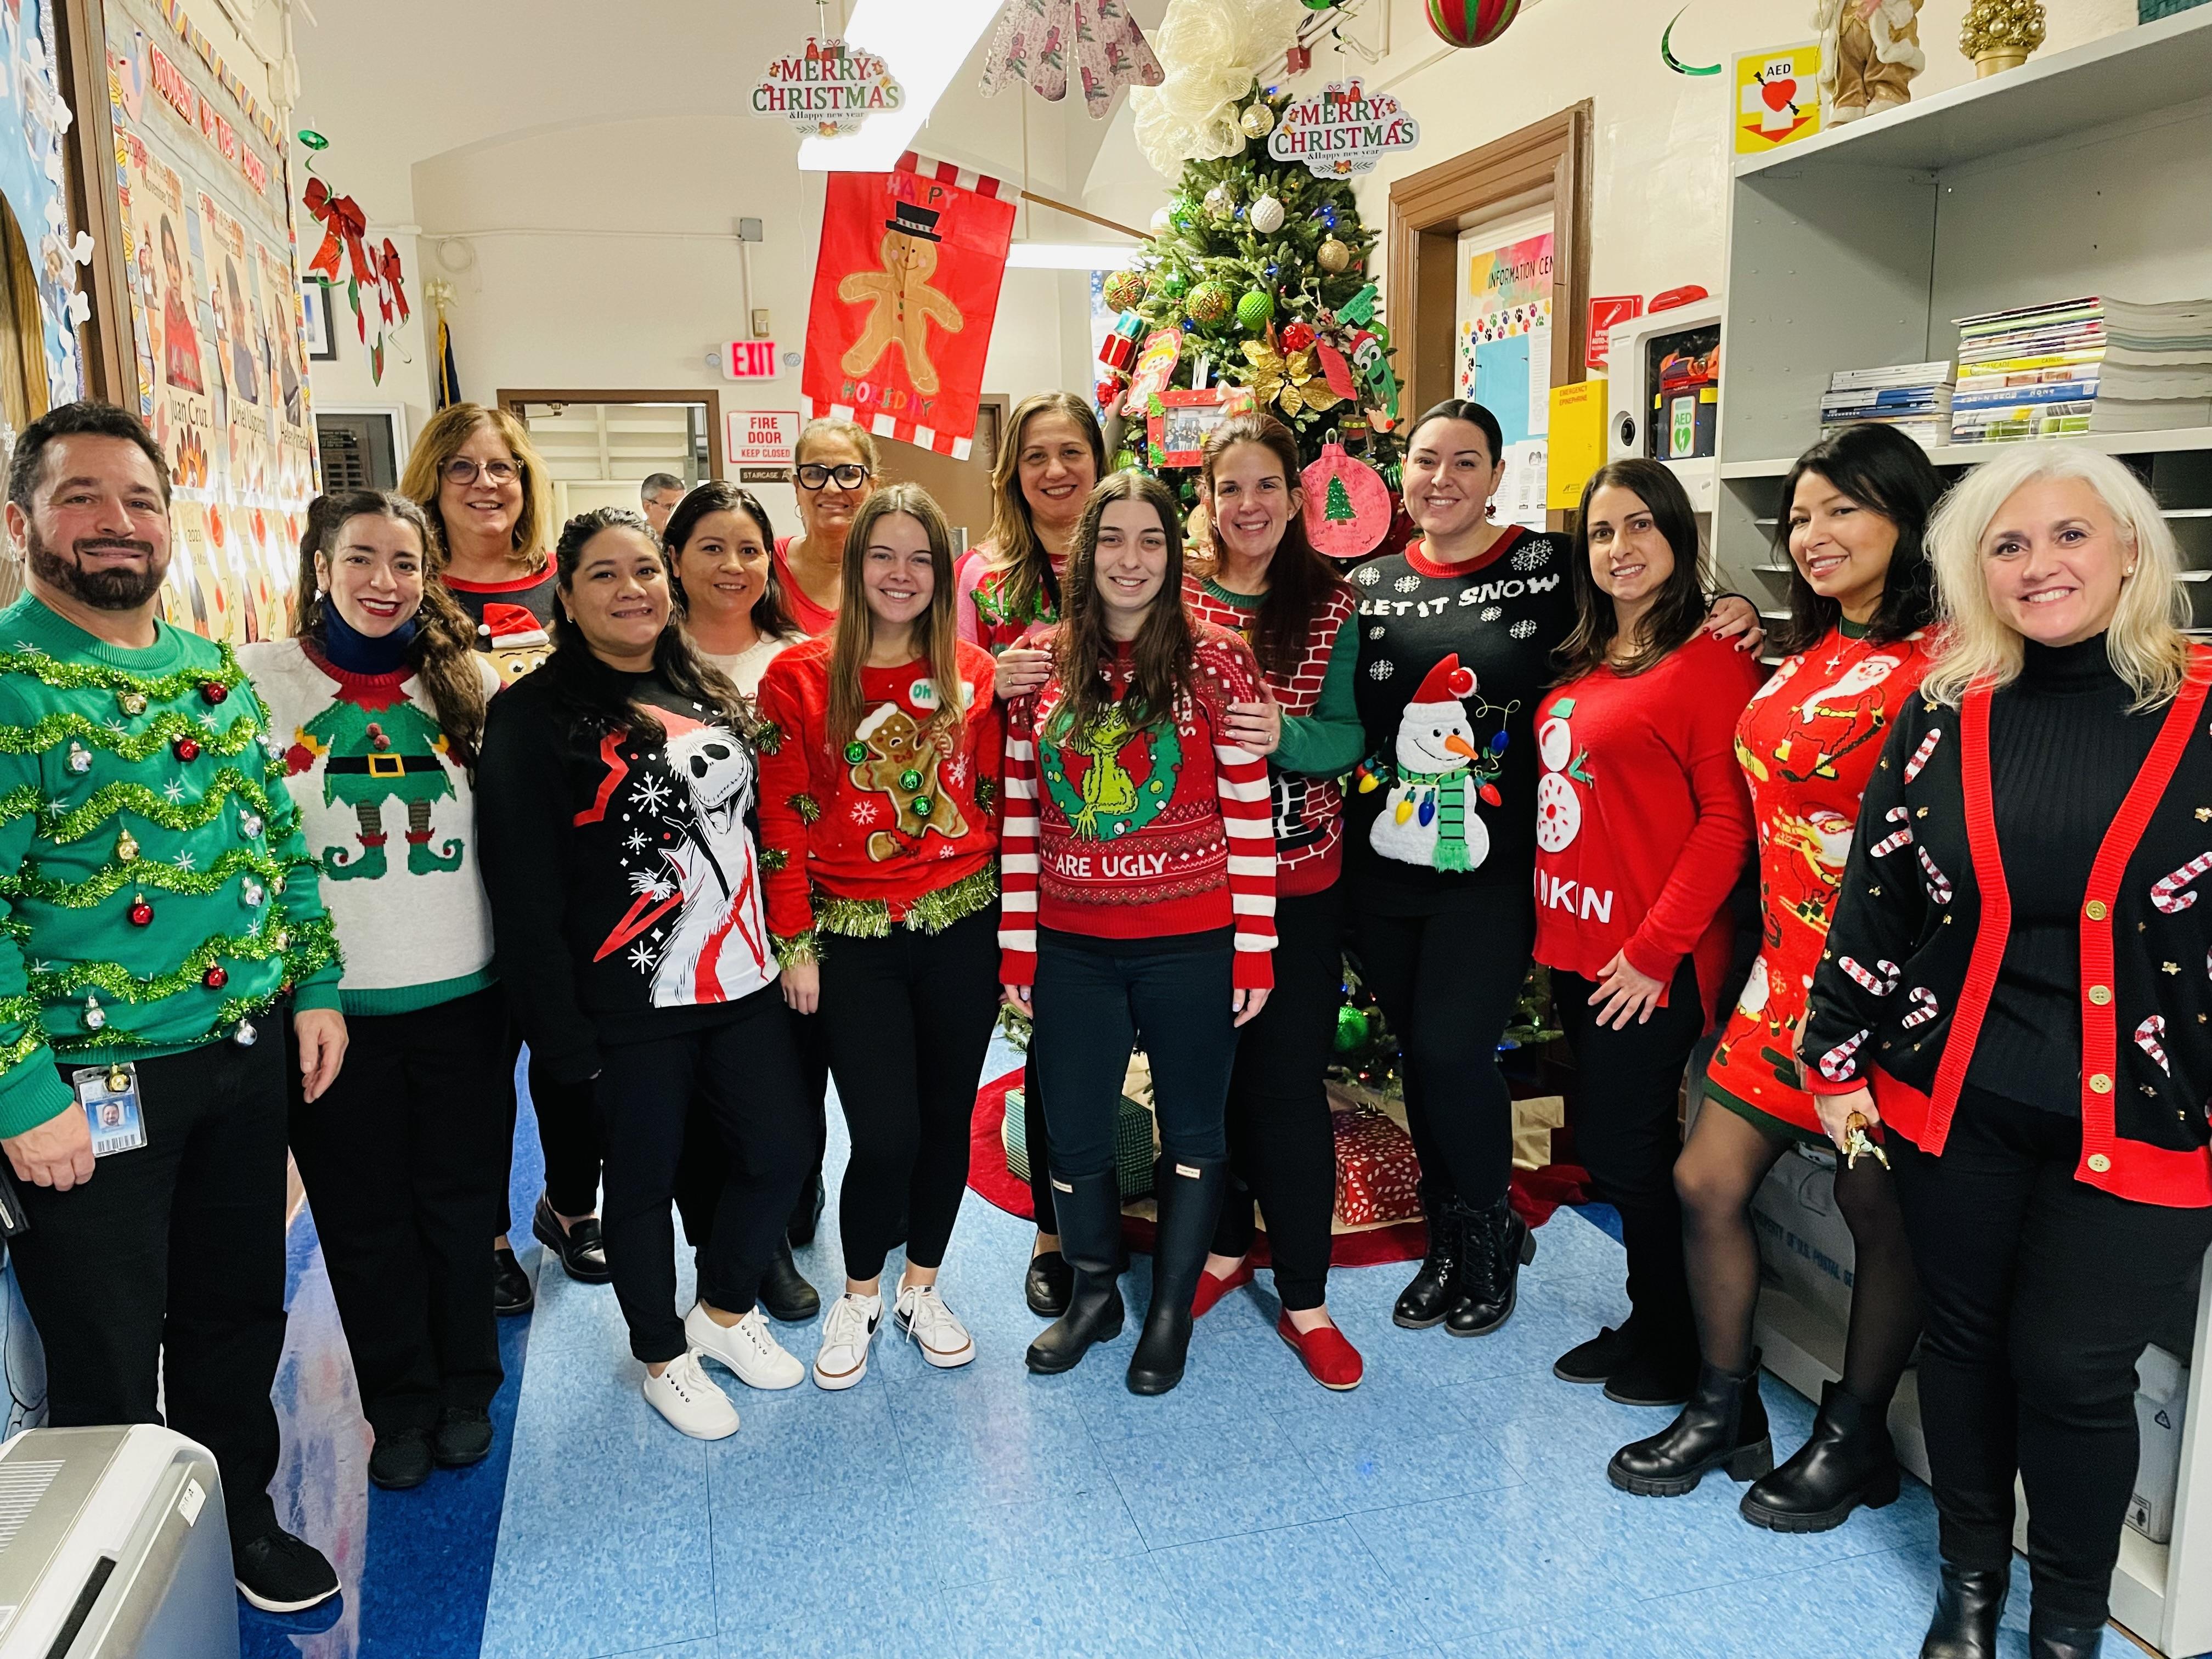 Holiday Cheer Week at the Jefferson School